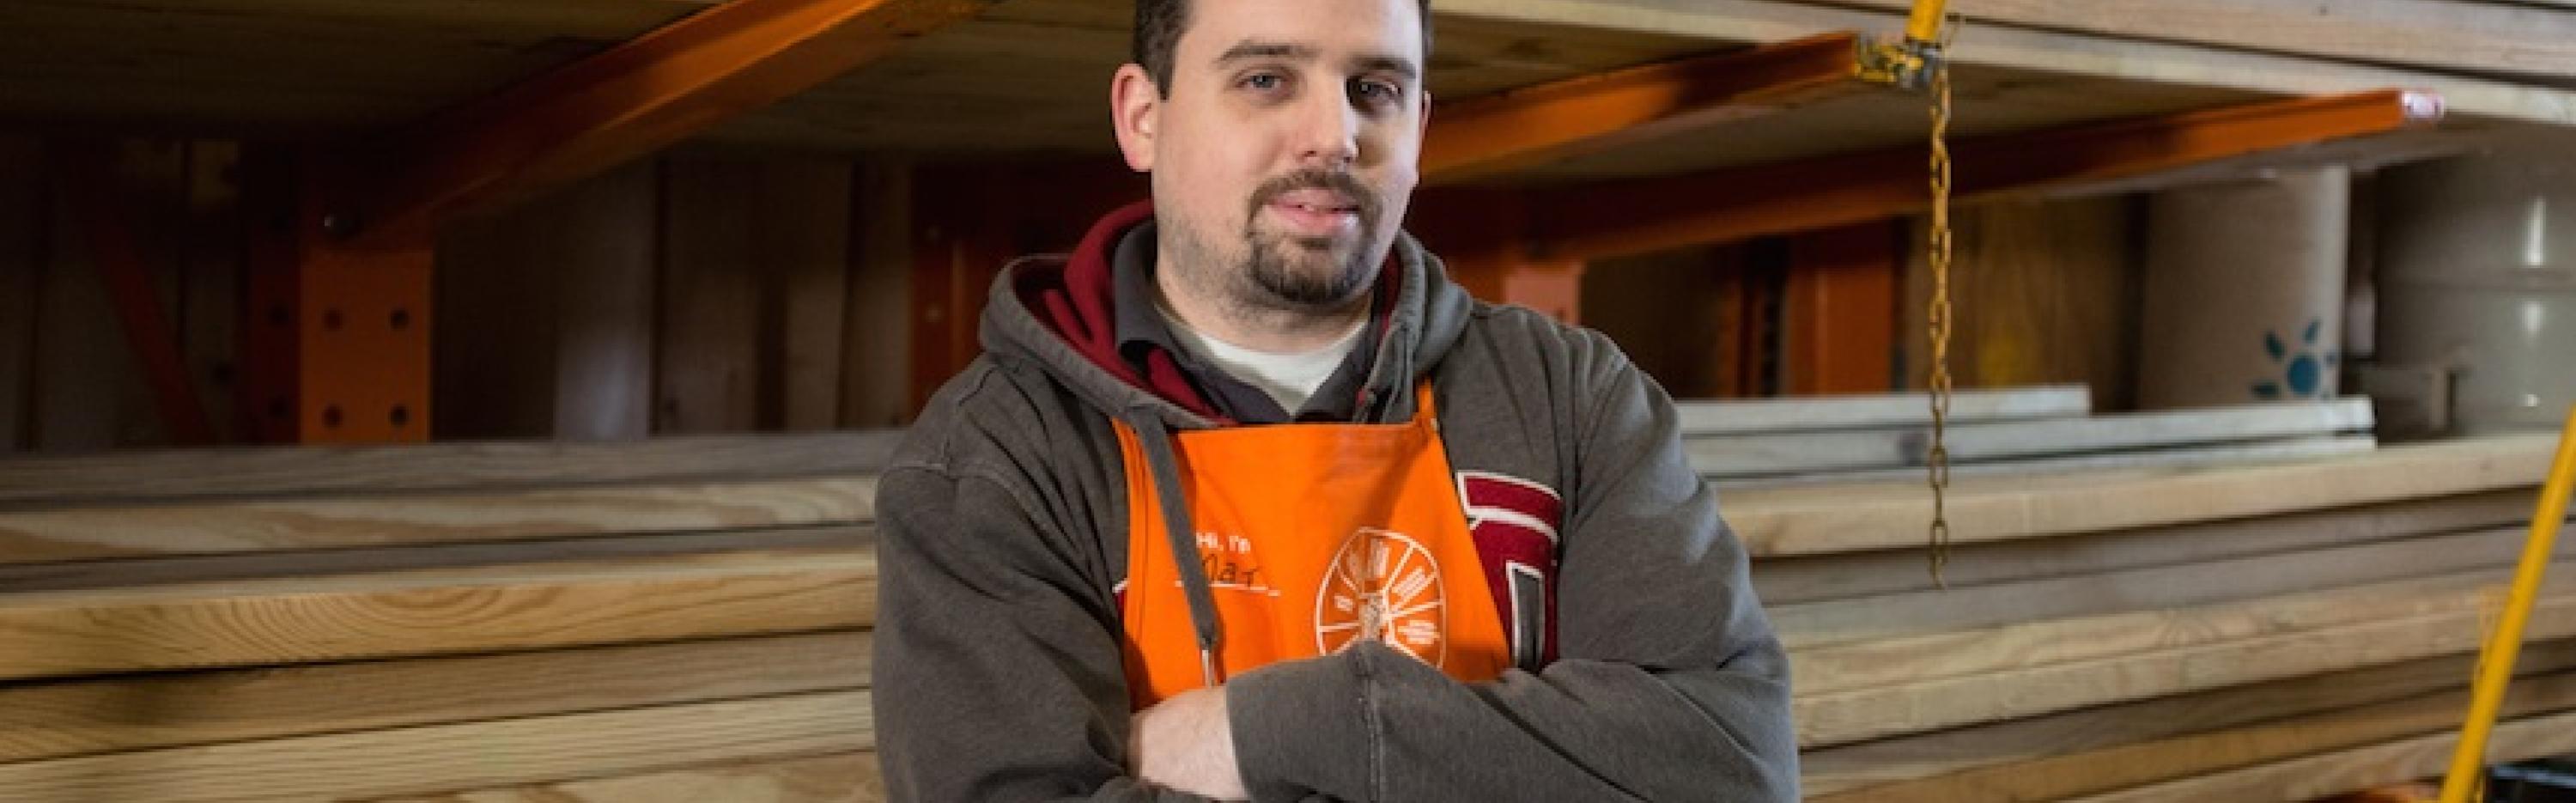 Moving Through The Aisles: How Active are Home Depot Associates?